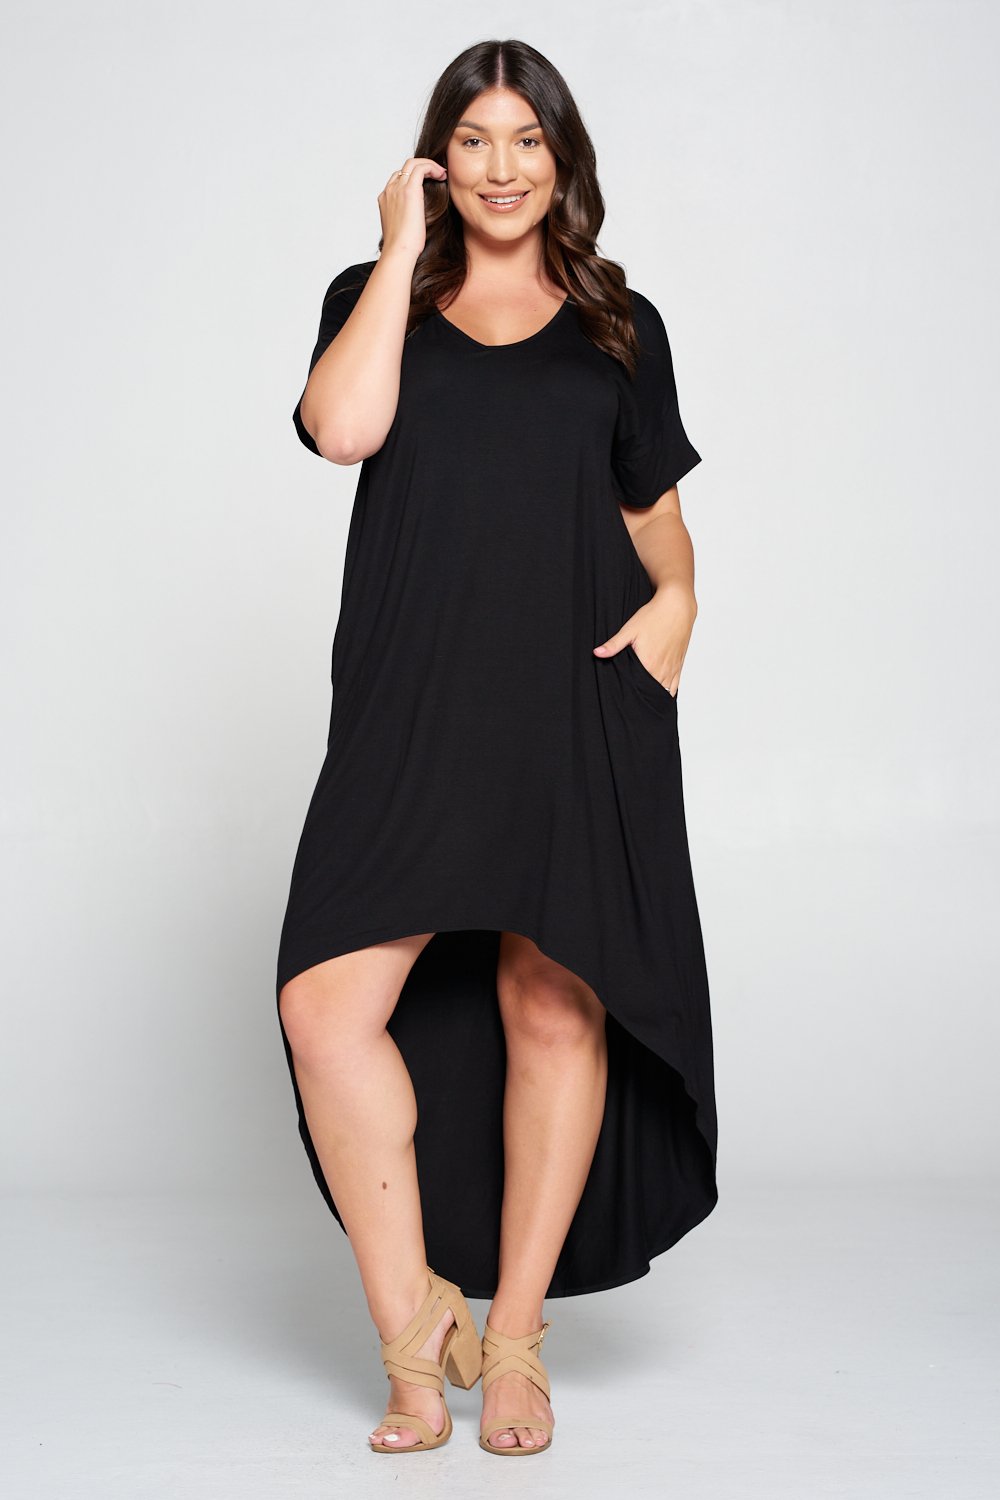 livd L I V D women's contemporary plus size clothing high low hi lo dress with pockets v neck sleeves in black